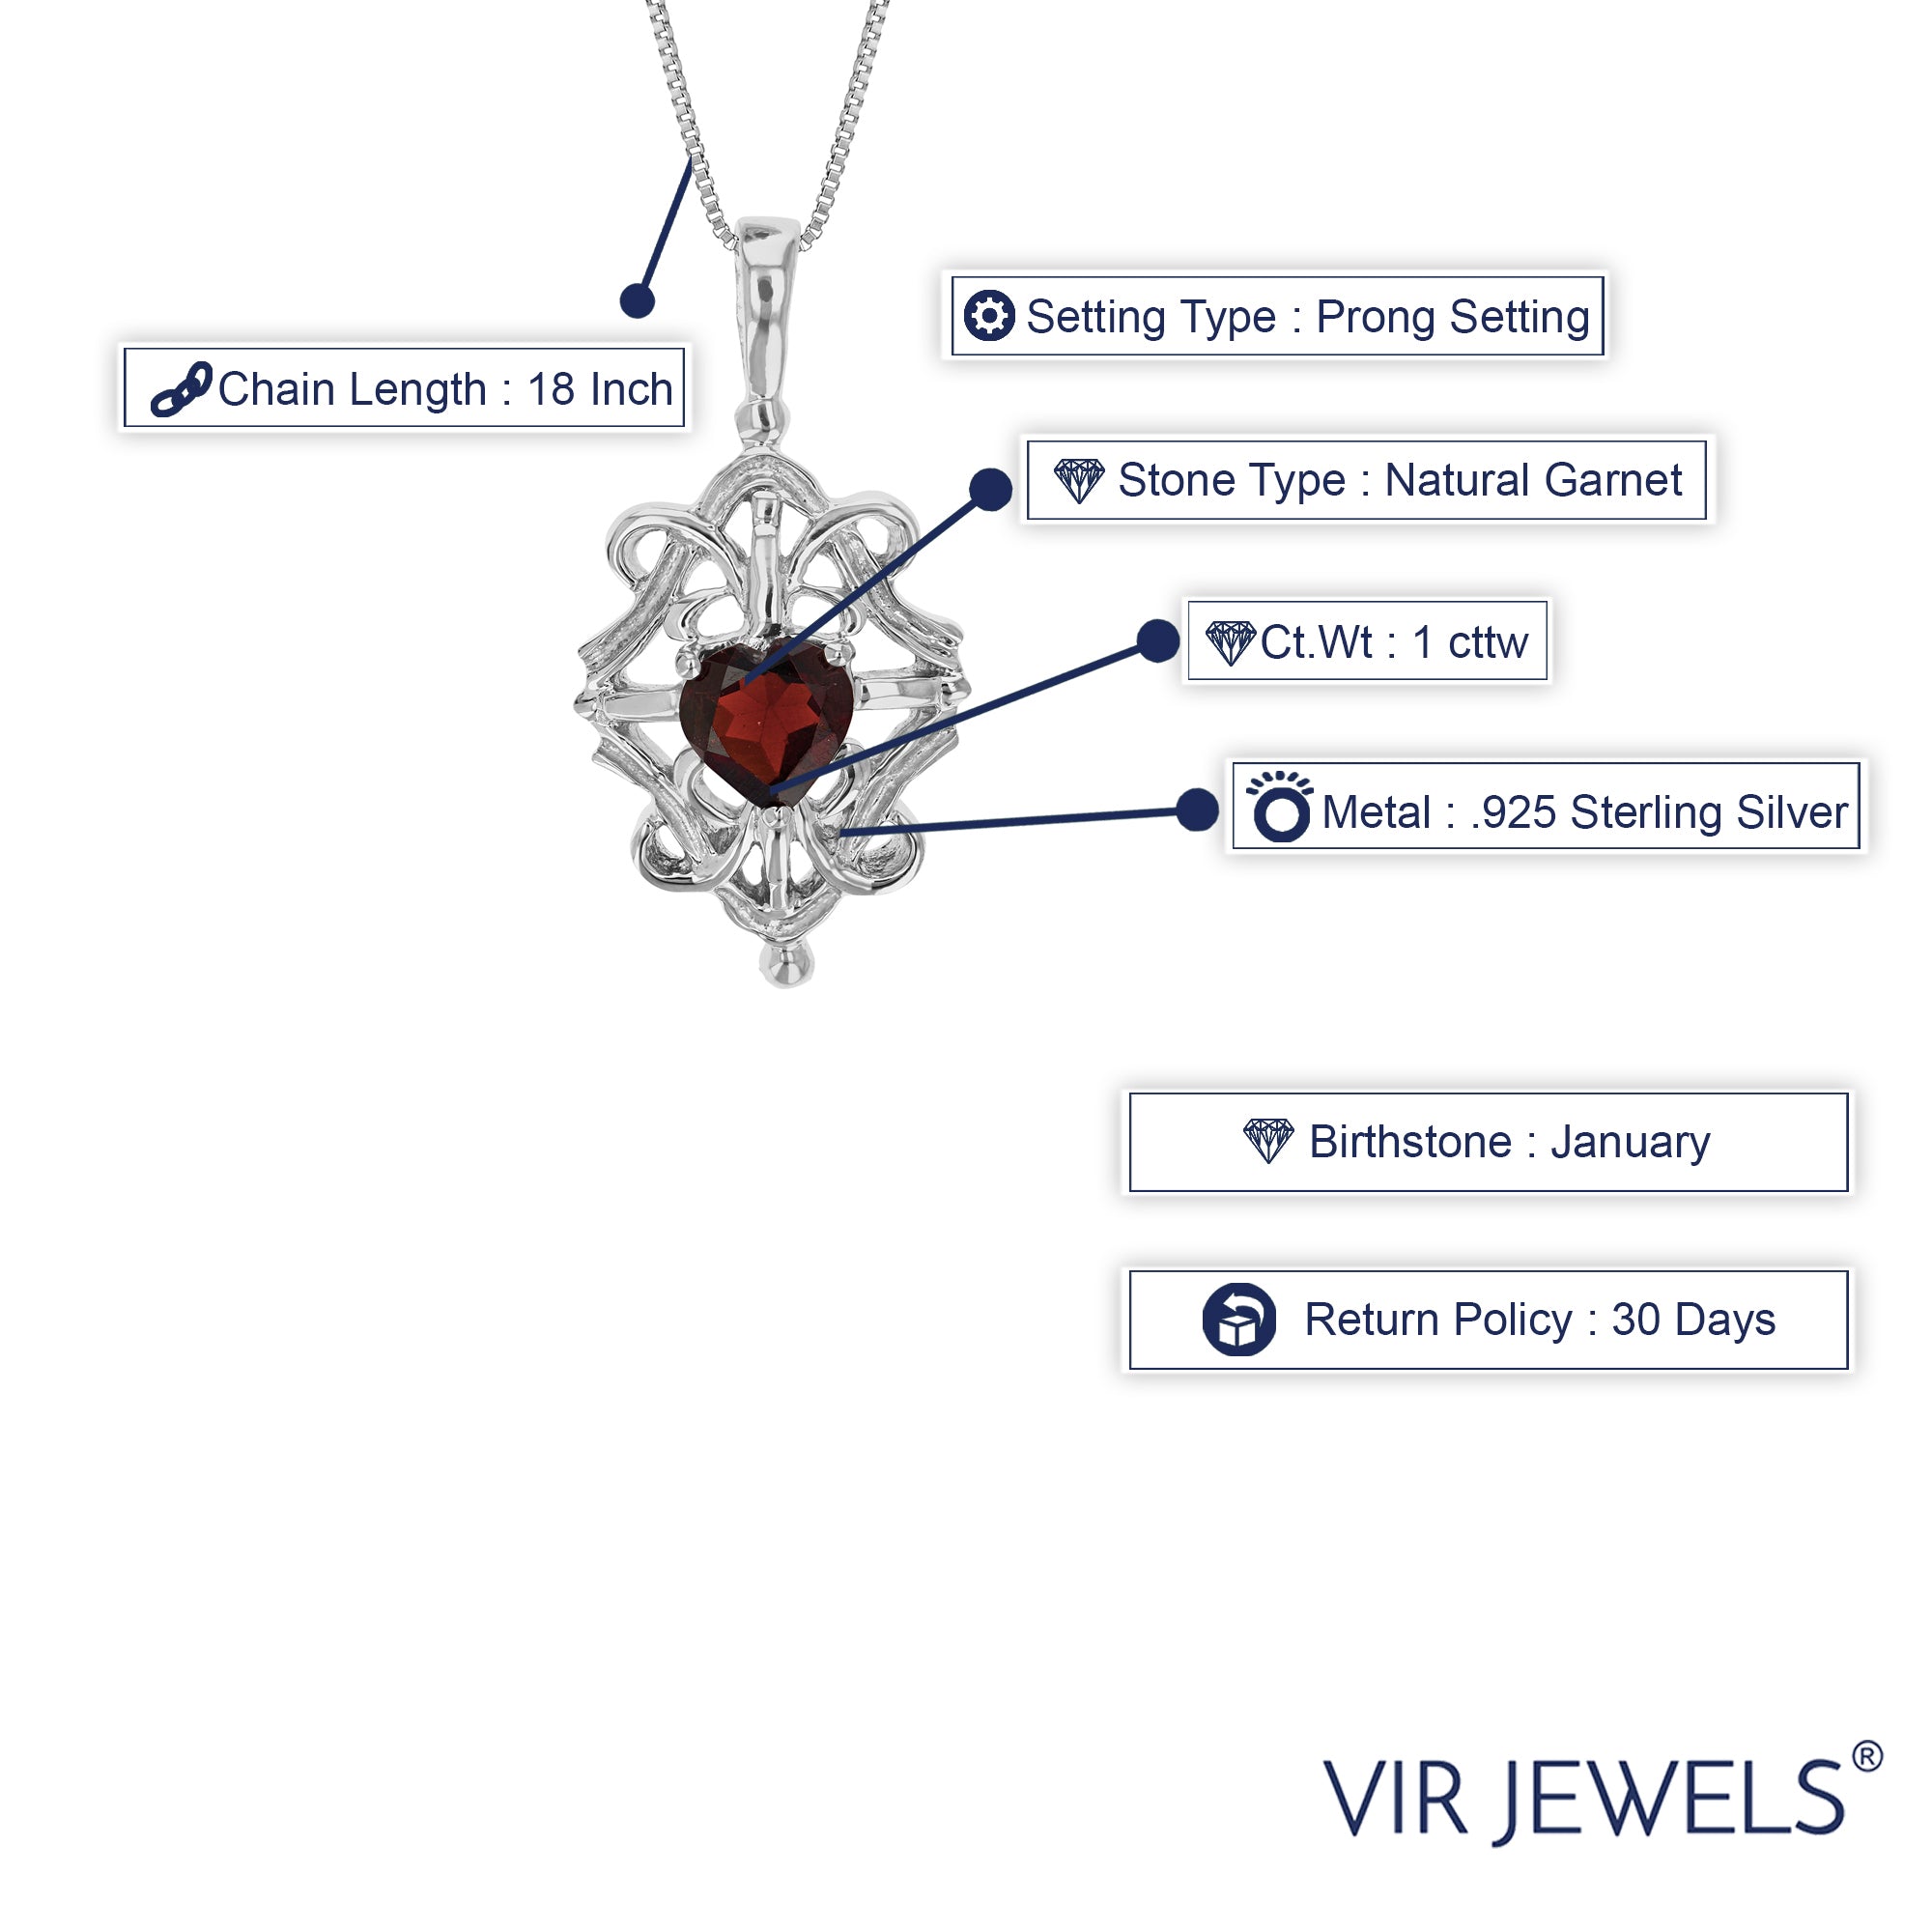 1 cttw Pendant Necklace, Garnet Heart Pendant Necklace for Women in .925 Sterling Silver with Rhodium, 18 Inch Chain, Prong Setting